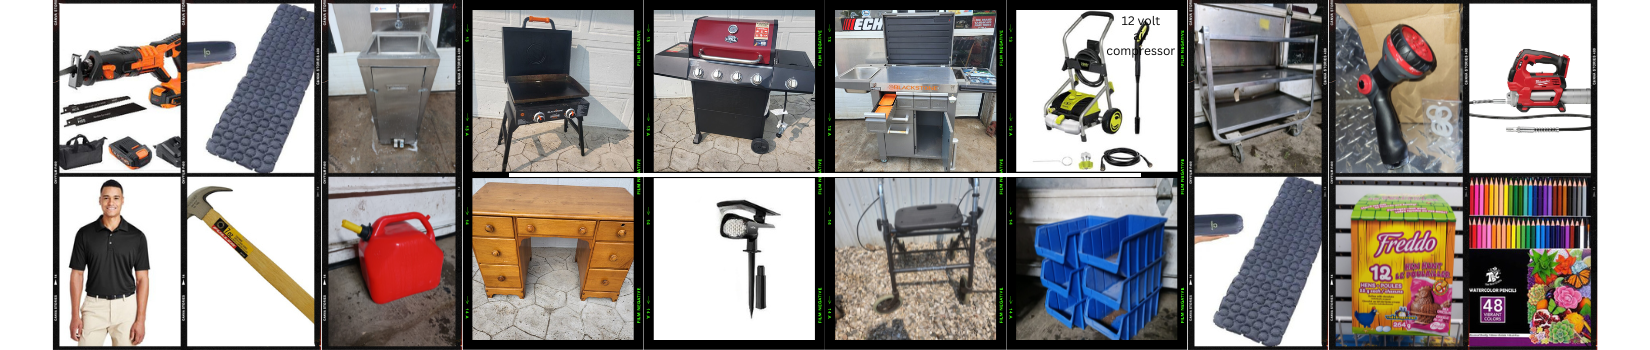 Zehr's Sale June 15th Lawn Mowers, Equipment, Tools and More Online Auction